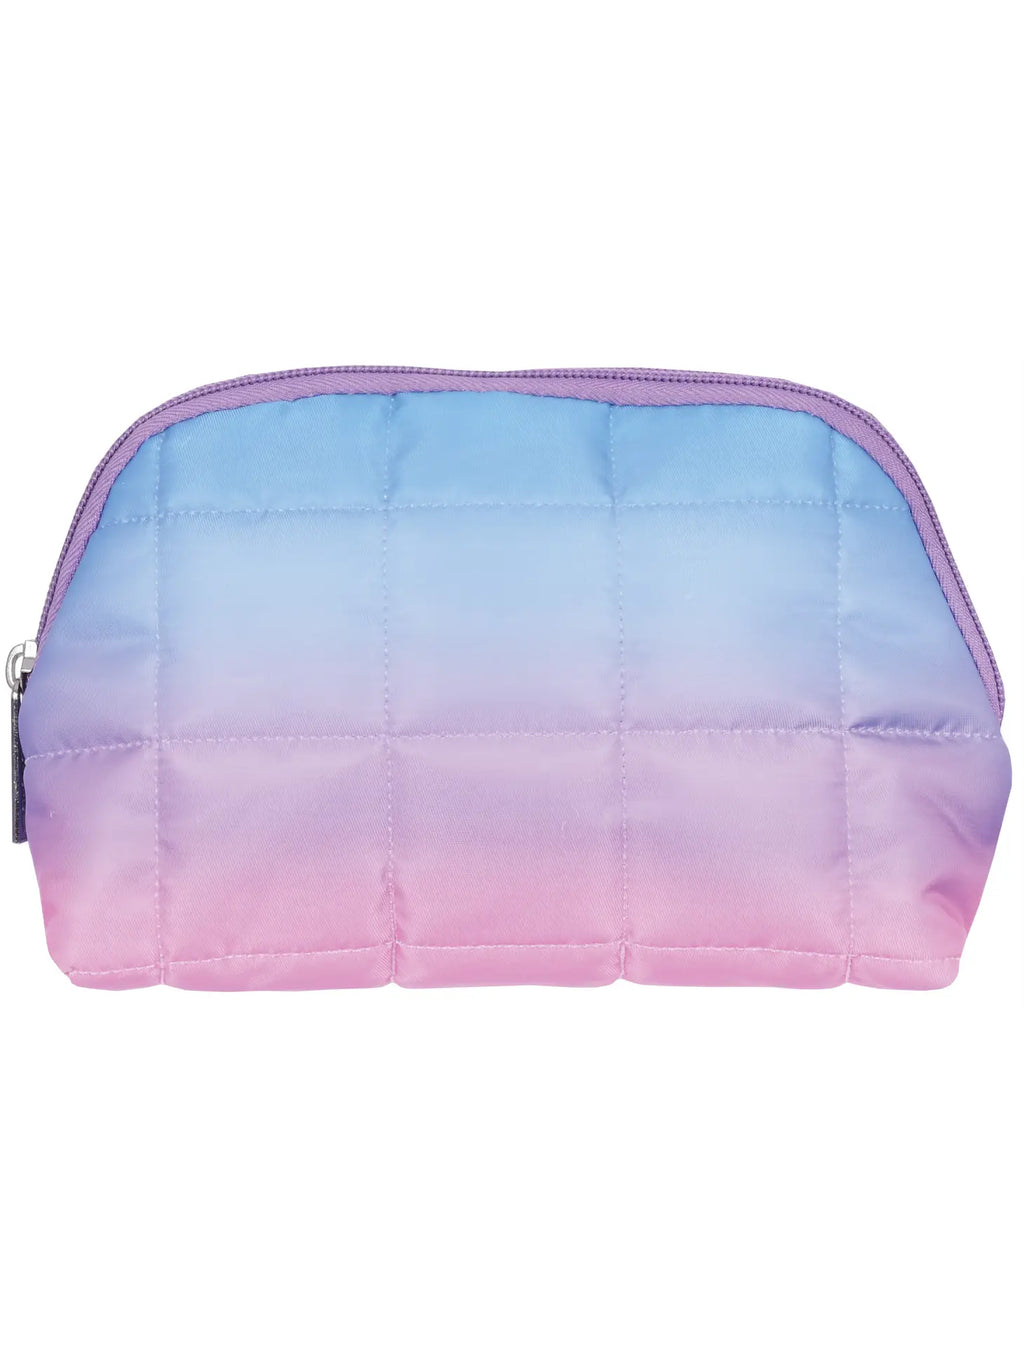 Iscream Purple Ombre Quilted Oval Cosmetic Bag